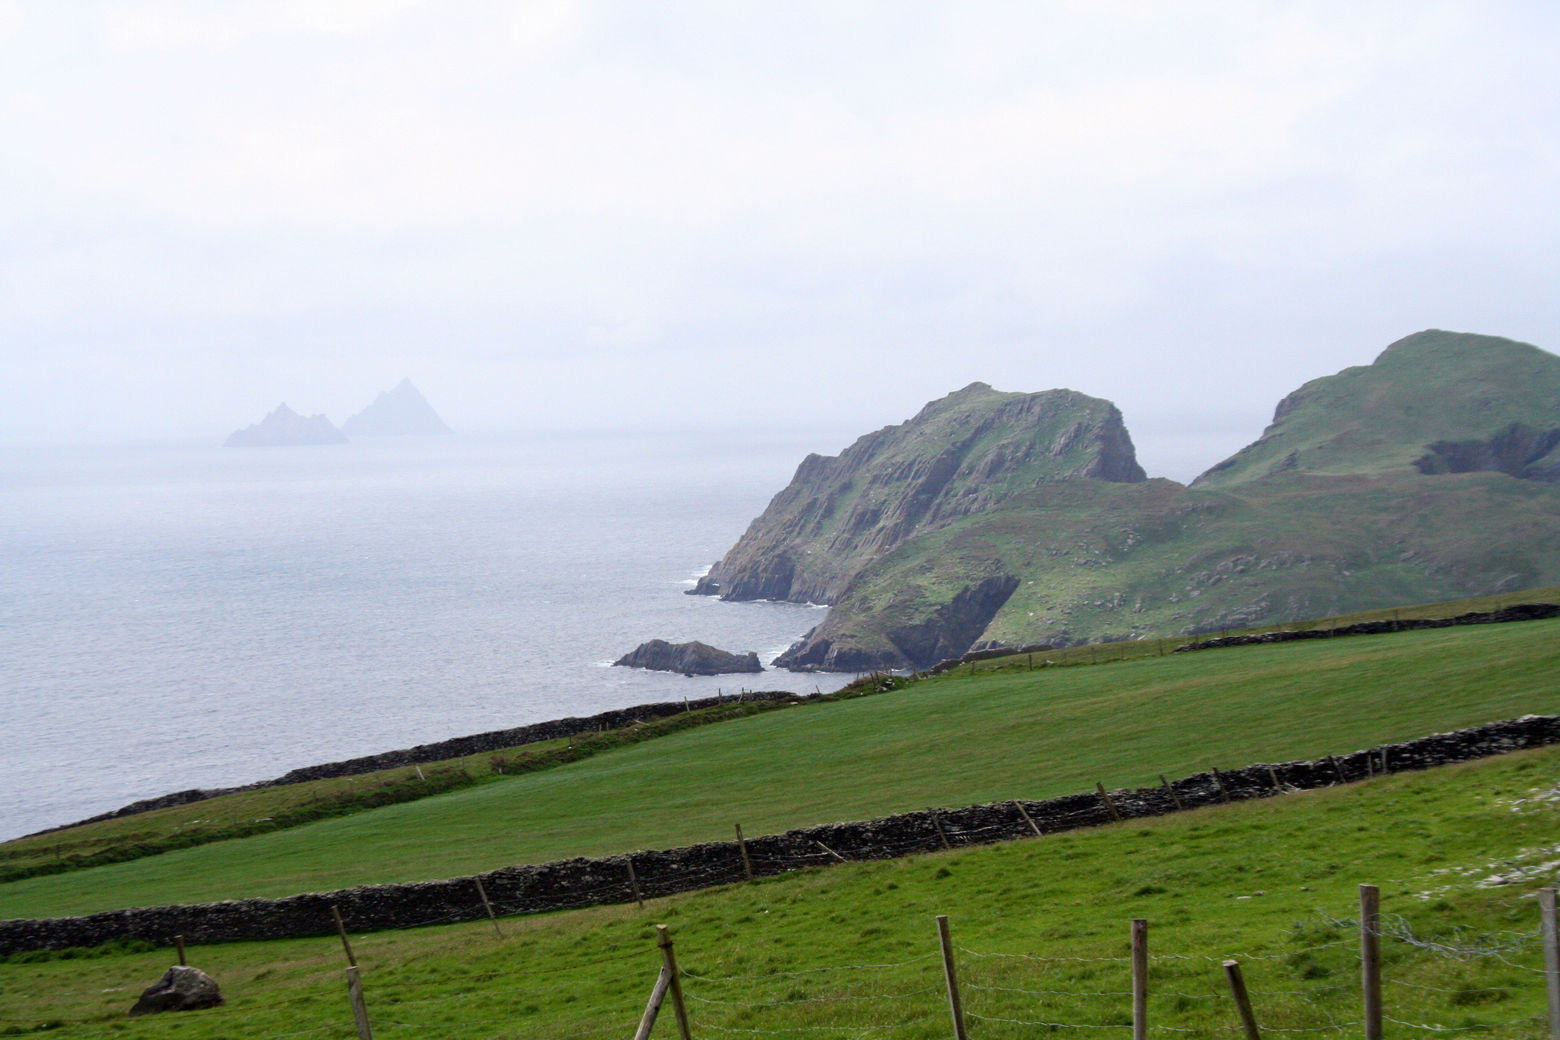 This May 28, 2012 photo shows a view of the Skellig Islands off the coast of the Iveragh Peninsula in County Kerry, Ireland. Ireland is about 300 miles from north to south and a driving trip in the country's western region takes you along hilly, narrow roads with spectacular views ranging from seaside cliffs to verdant farmland.  (AP Photo/Jake Coyle)